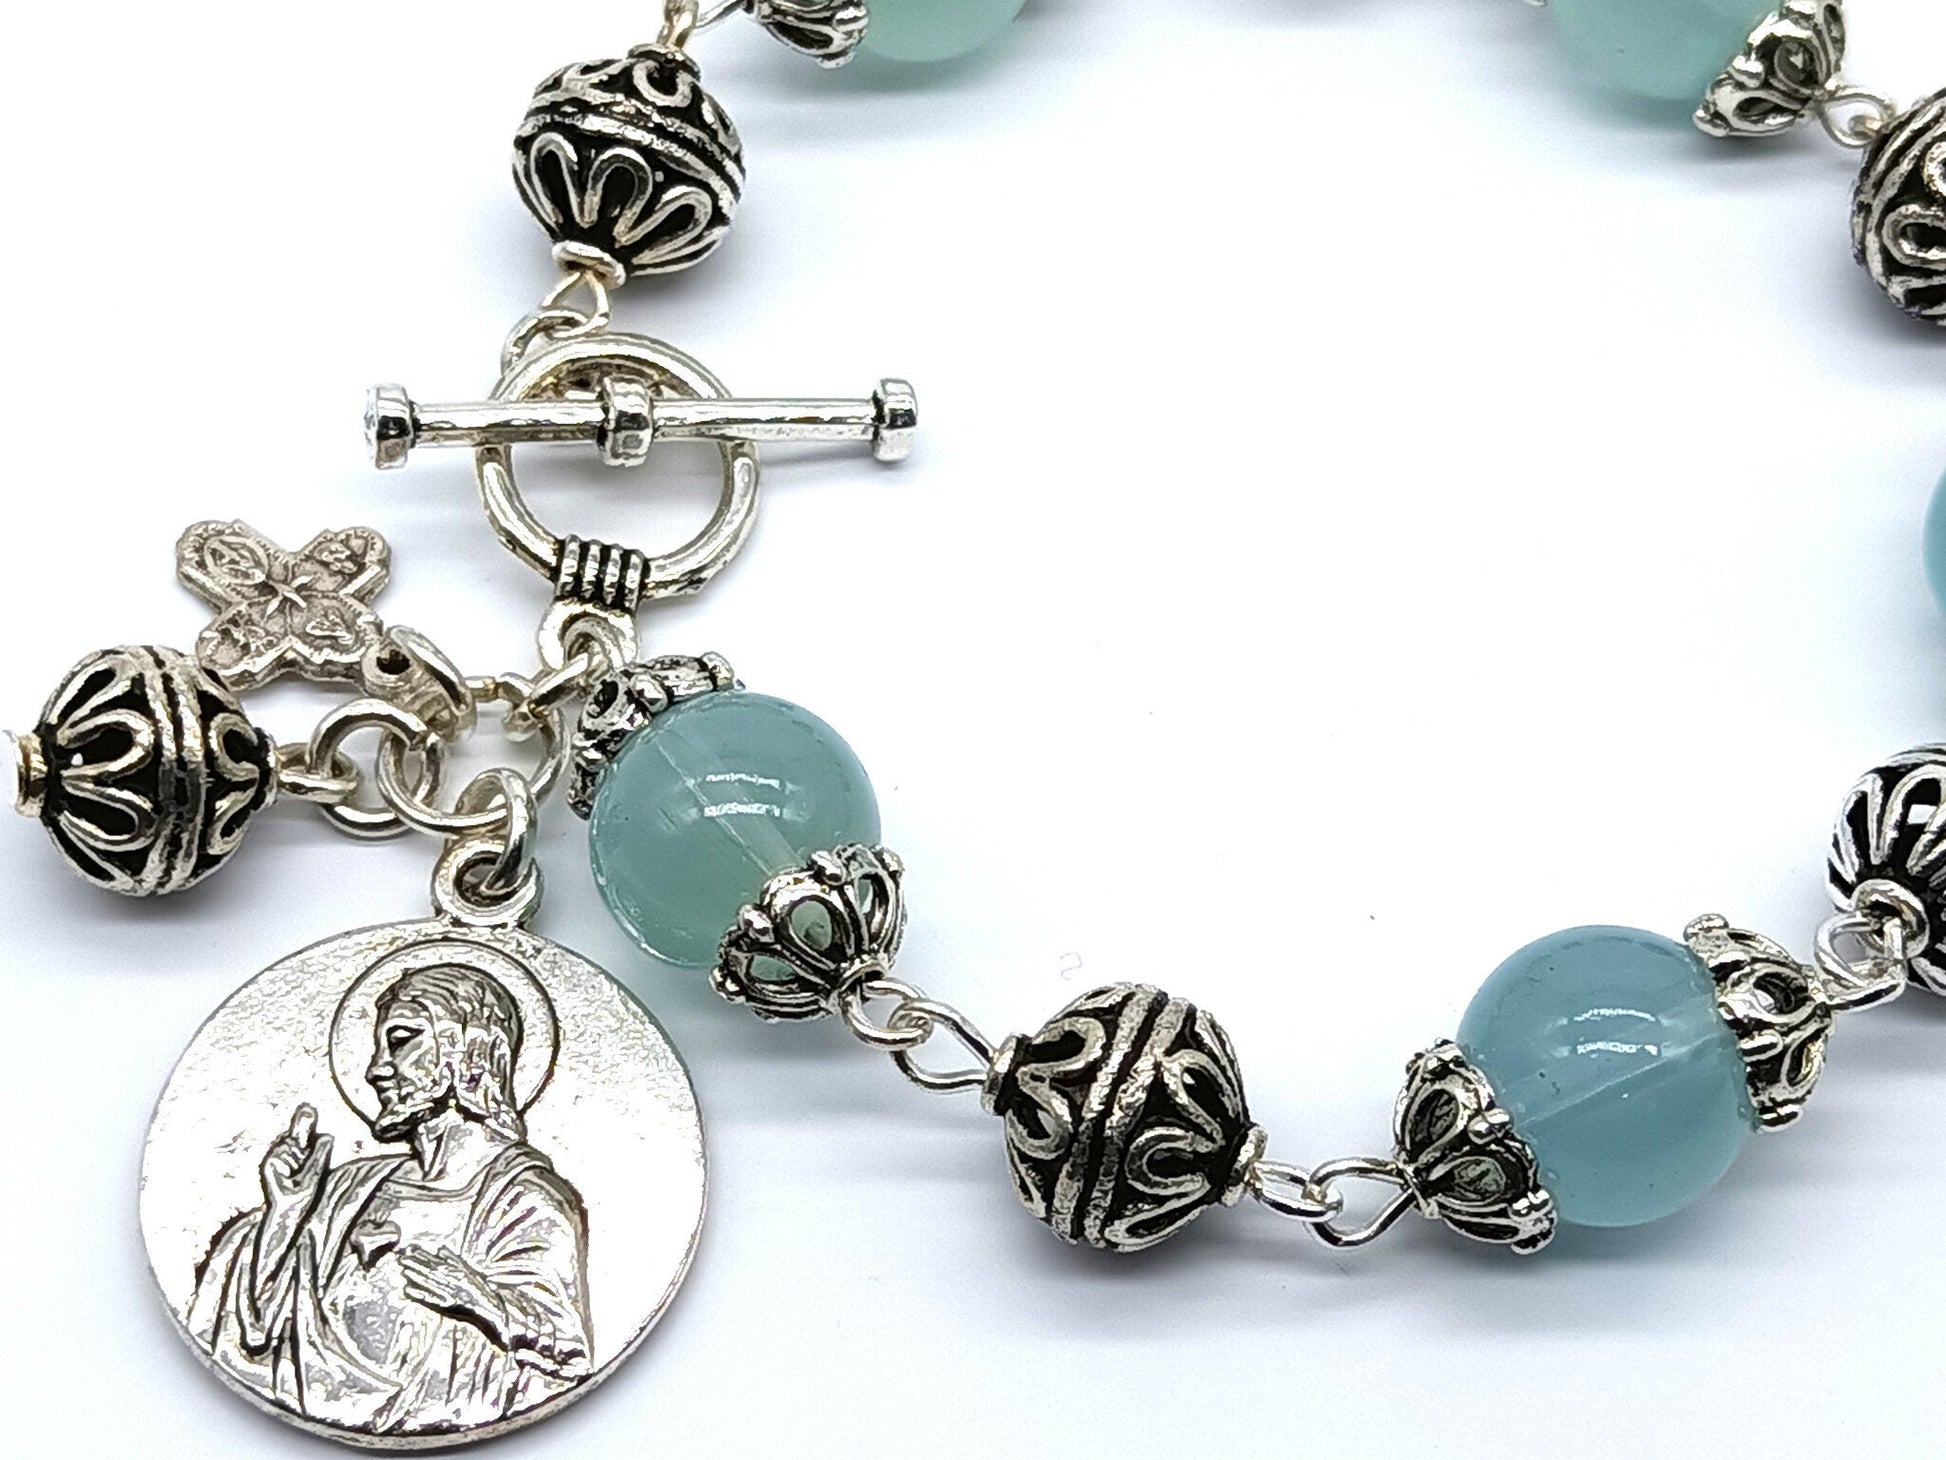 Our Lady of Mount Carmel unique rosary beads single decade bracelet with pale blue glass beads, silver cross, medals and beads.